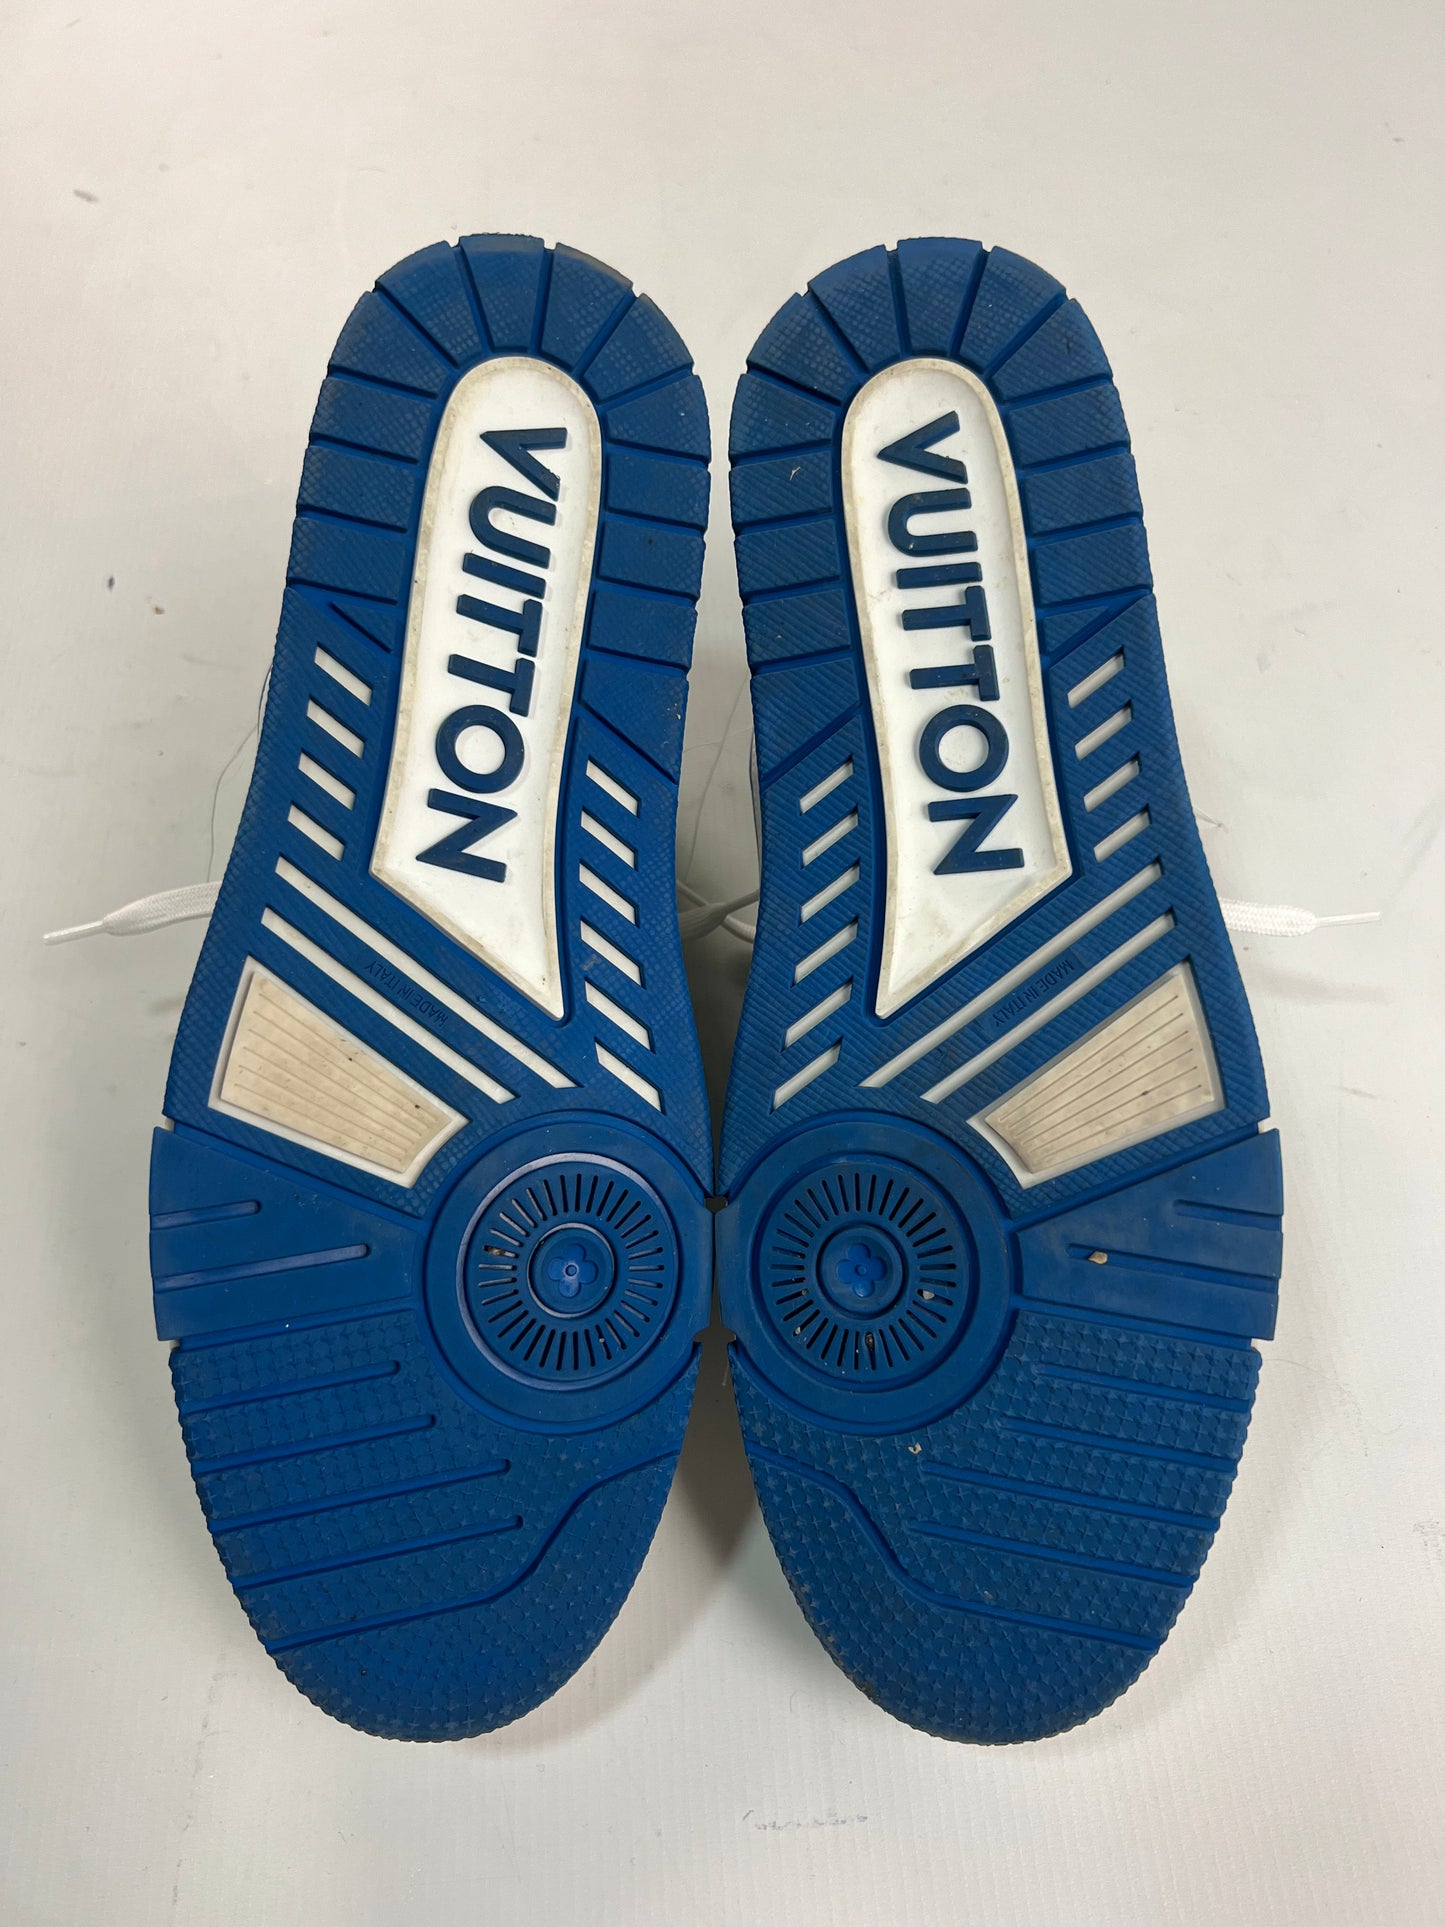 Louis Vuitton 1/100 Upcycled Trainer sneakers in White Blue Sneaker SZ:10.5